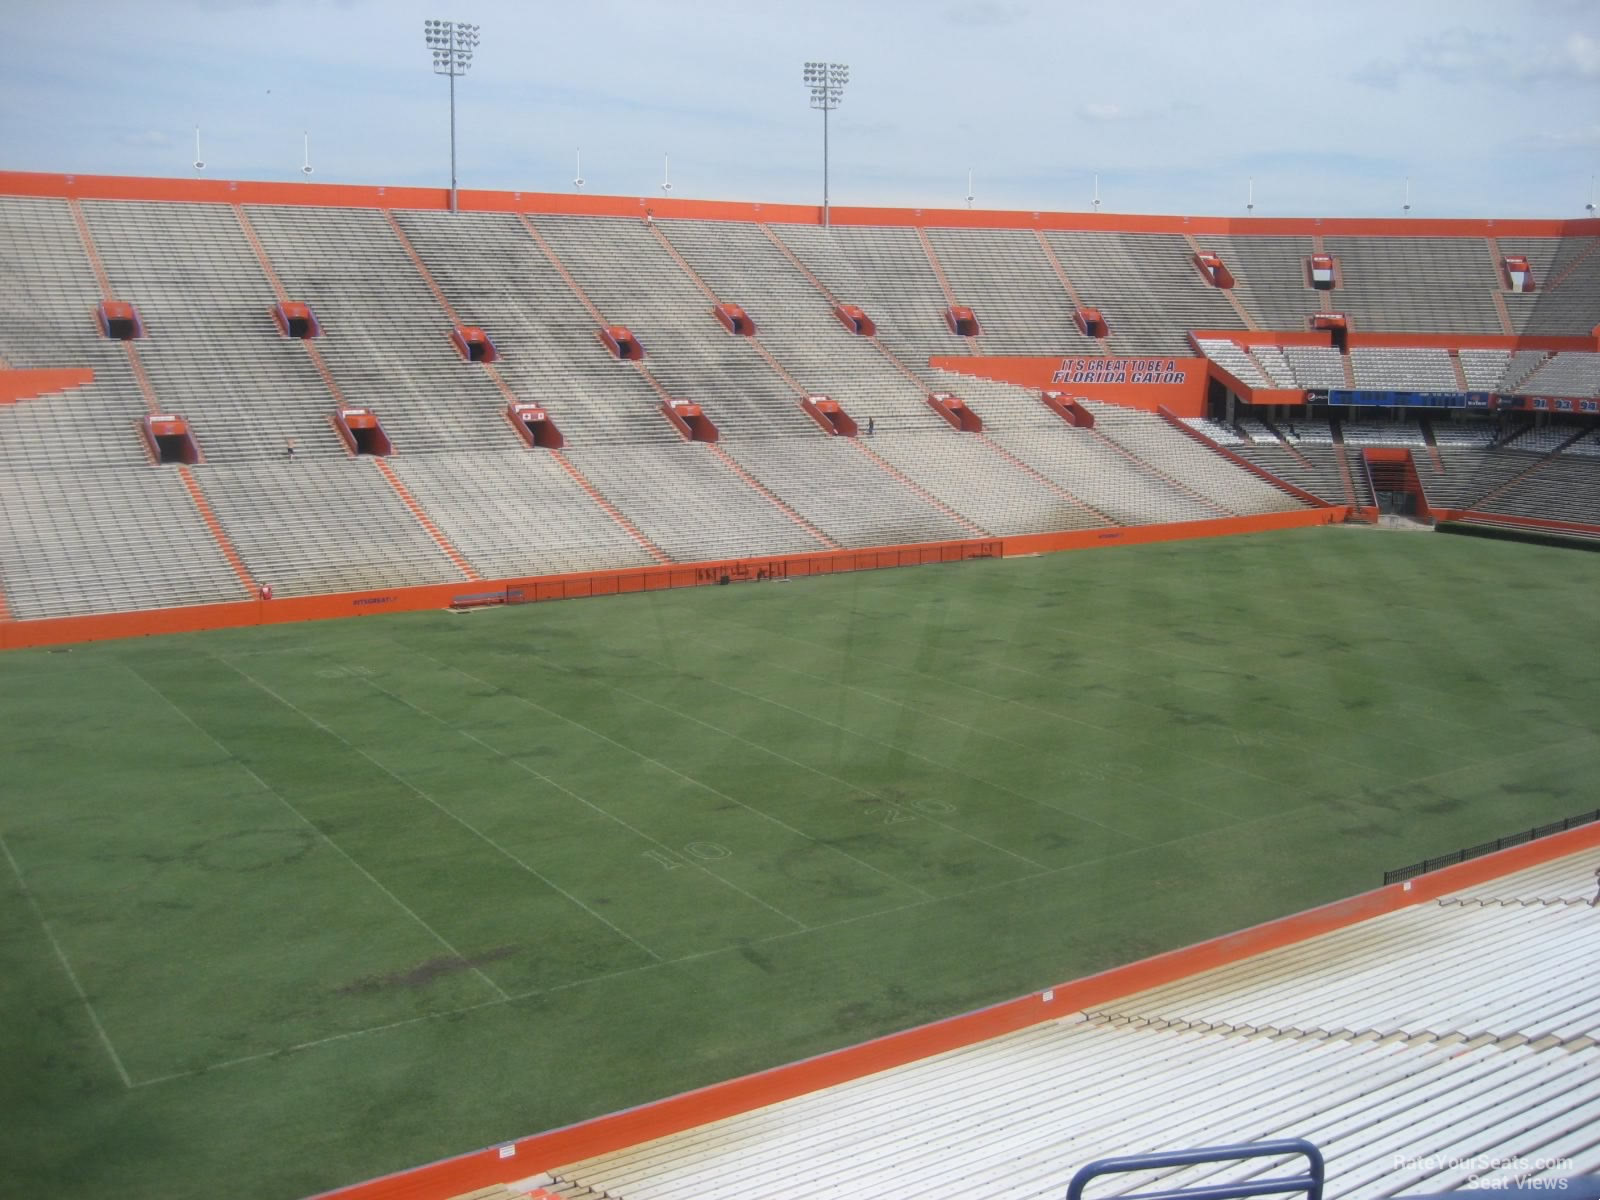 section 19, row 58 seat view  - ben hill griffin stadium